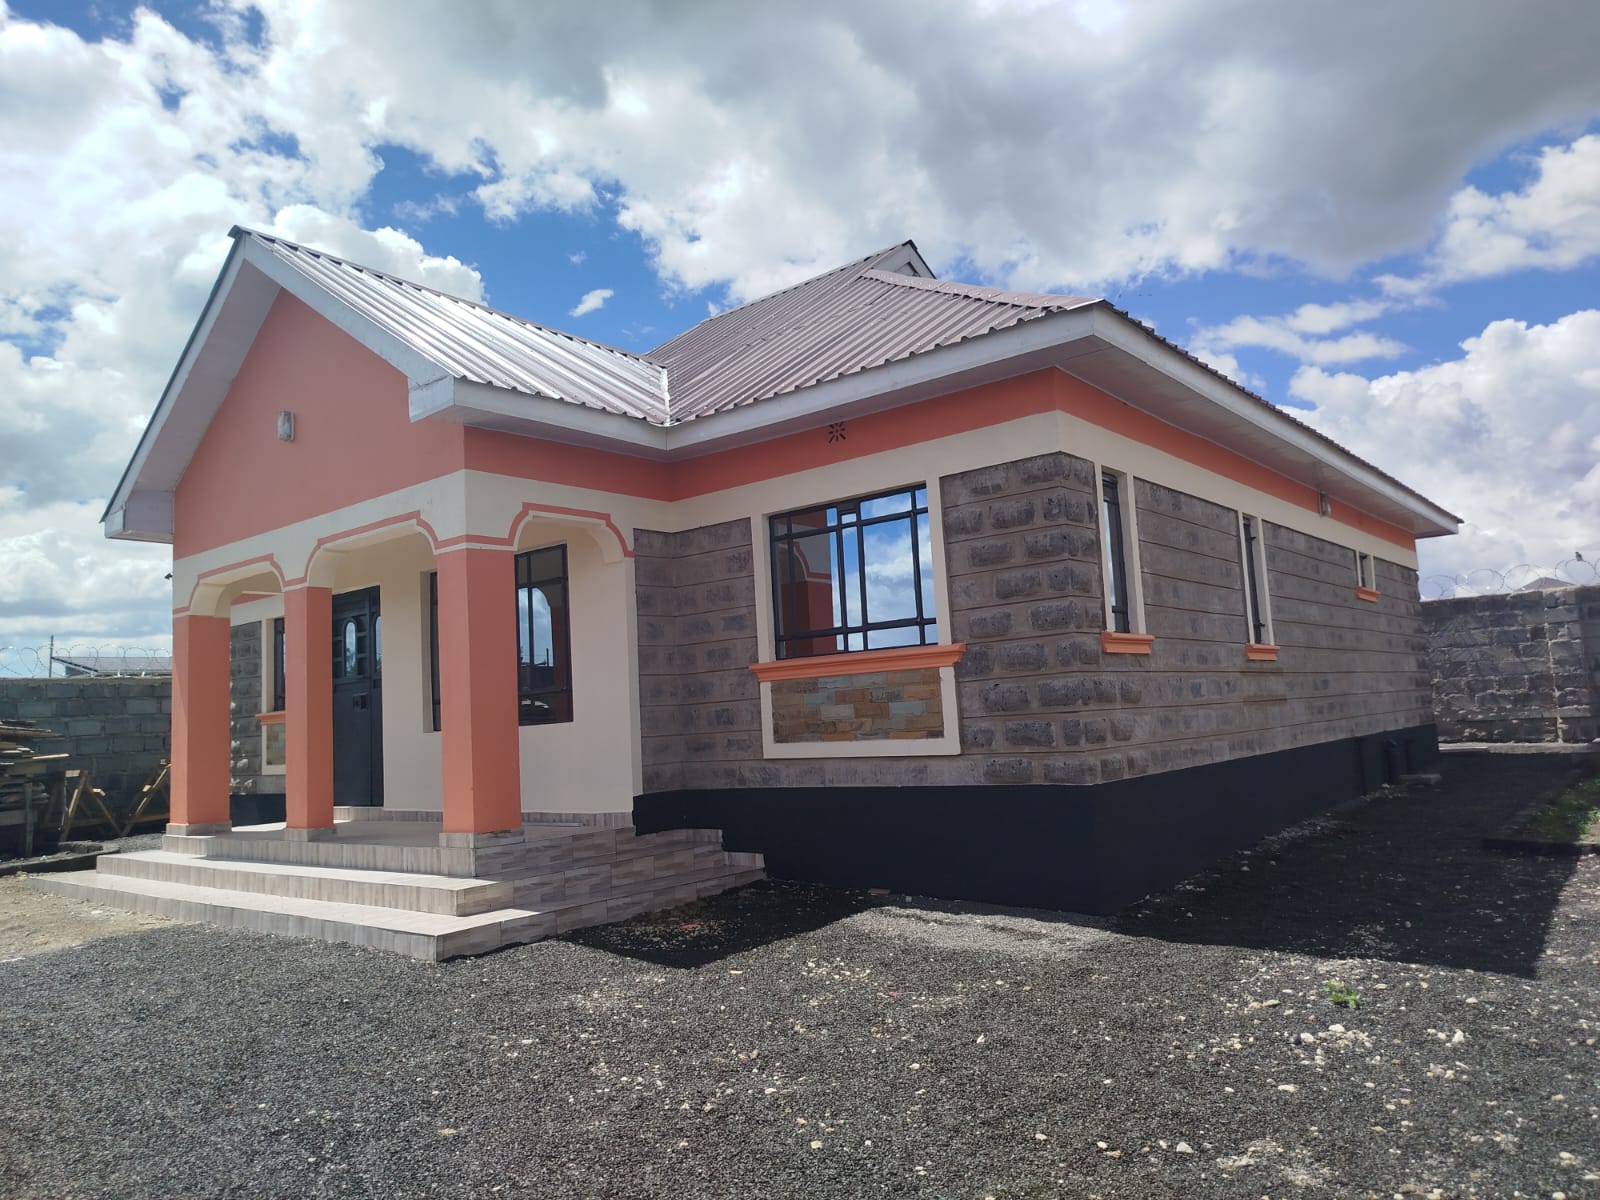 Spacious 3 Bedroom Bungalow For Sale in Kitengela. Sitting in a 1/8 Acre. The asking price: is 6.25 million. Musili Homes